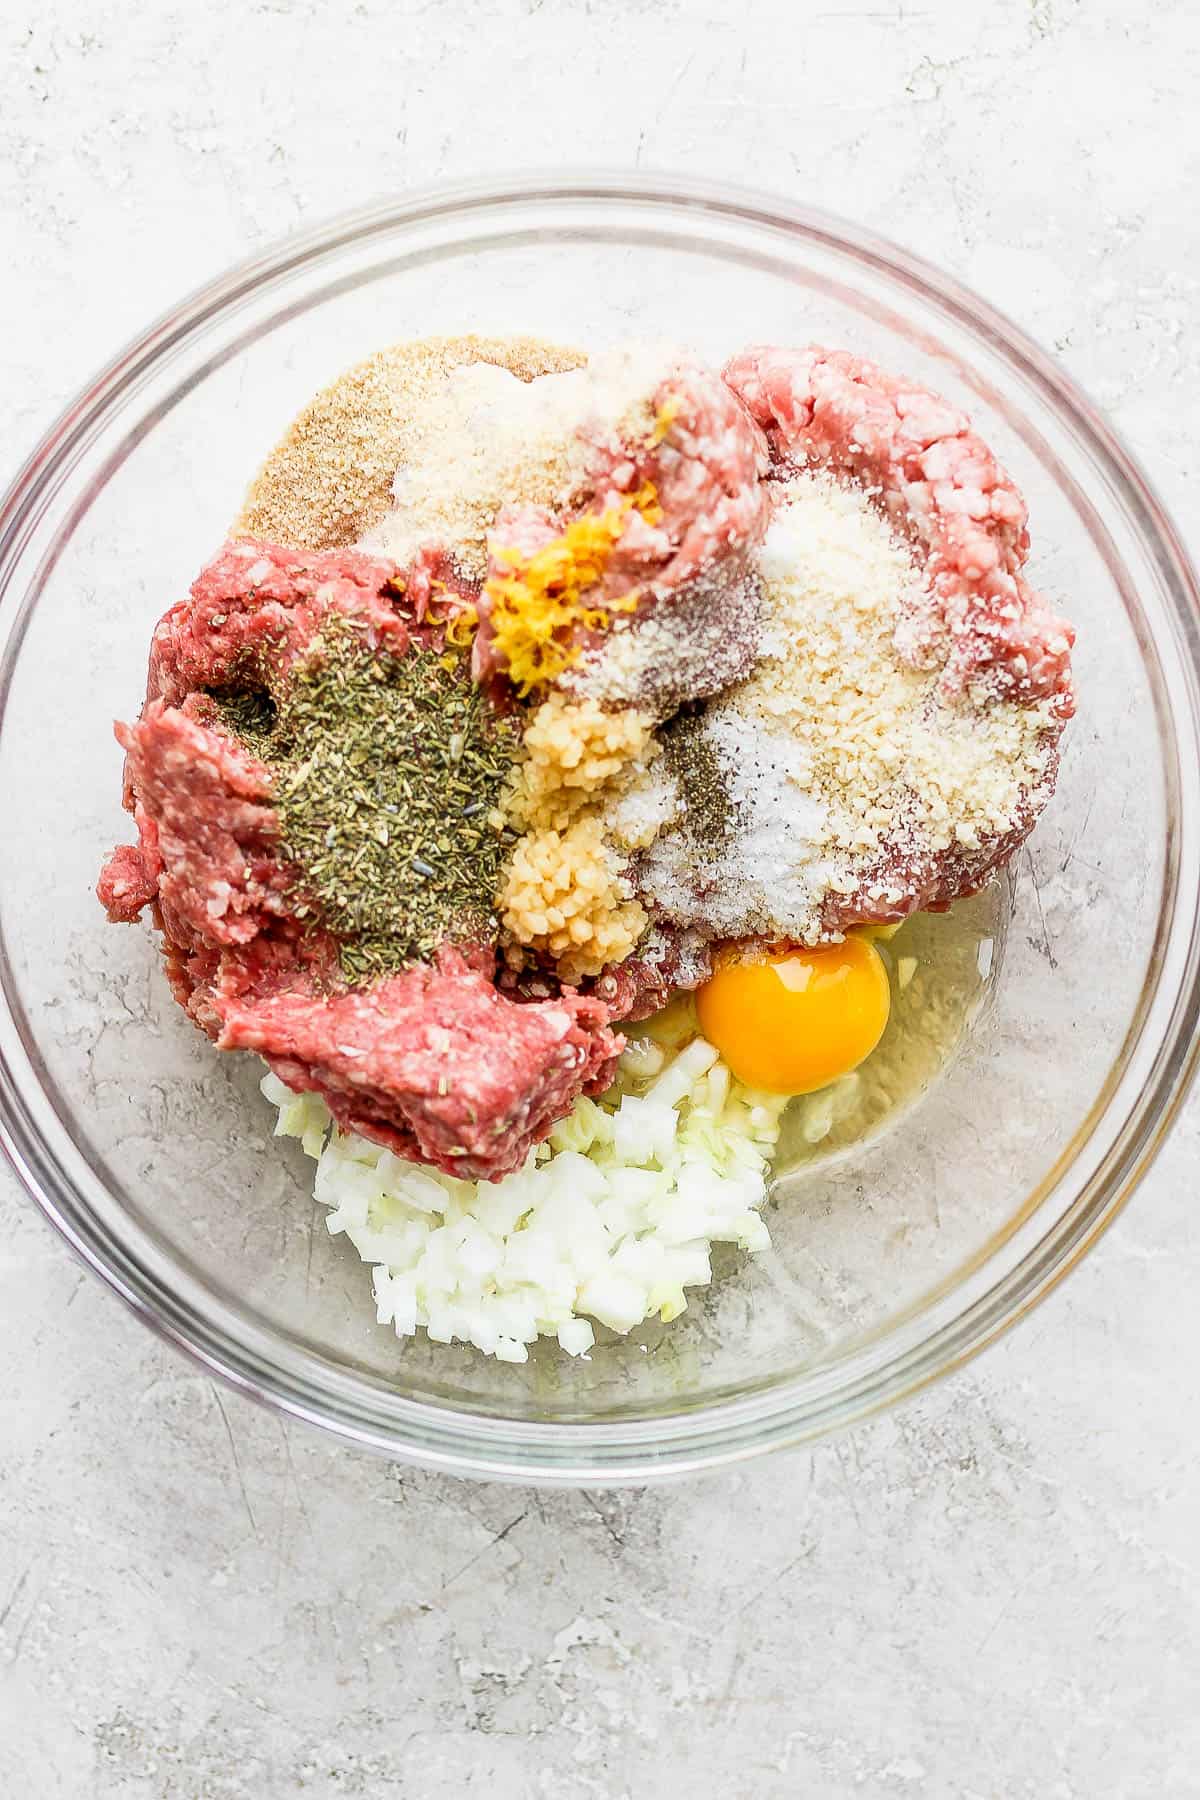 ground beef, ground pork, italian seasoning, lemon zest, grated onion, egg, breadcrumbs, salt and pepper in a mixing bowl.